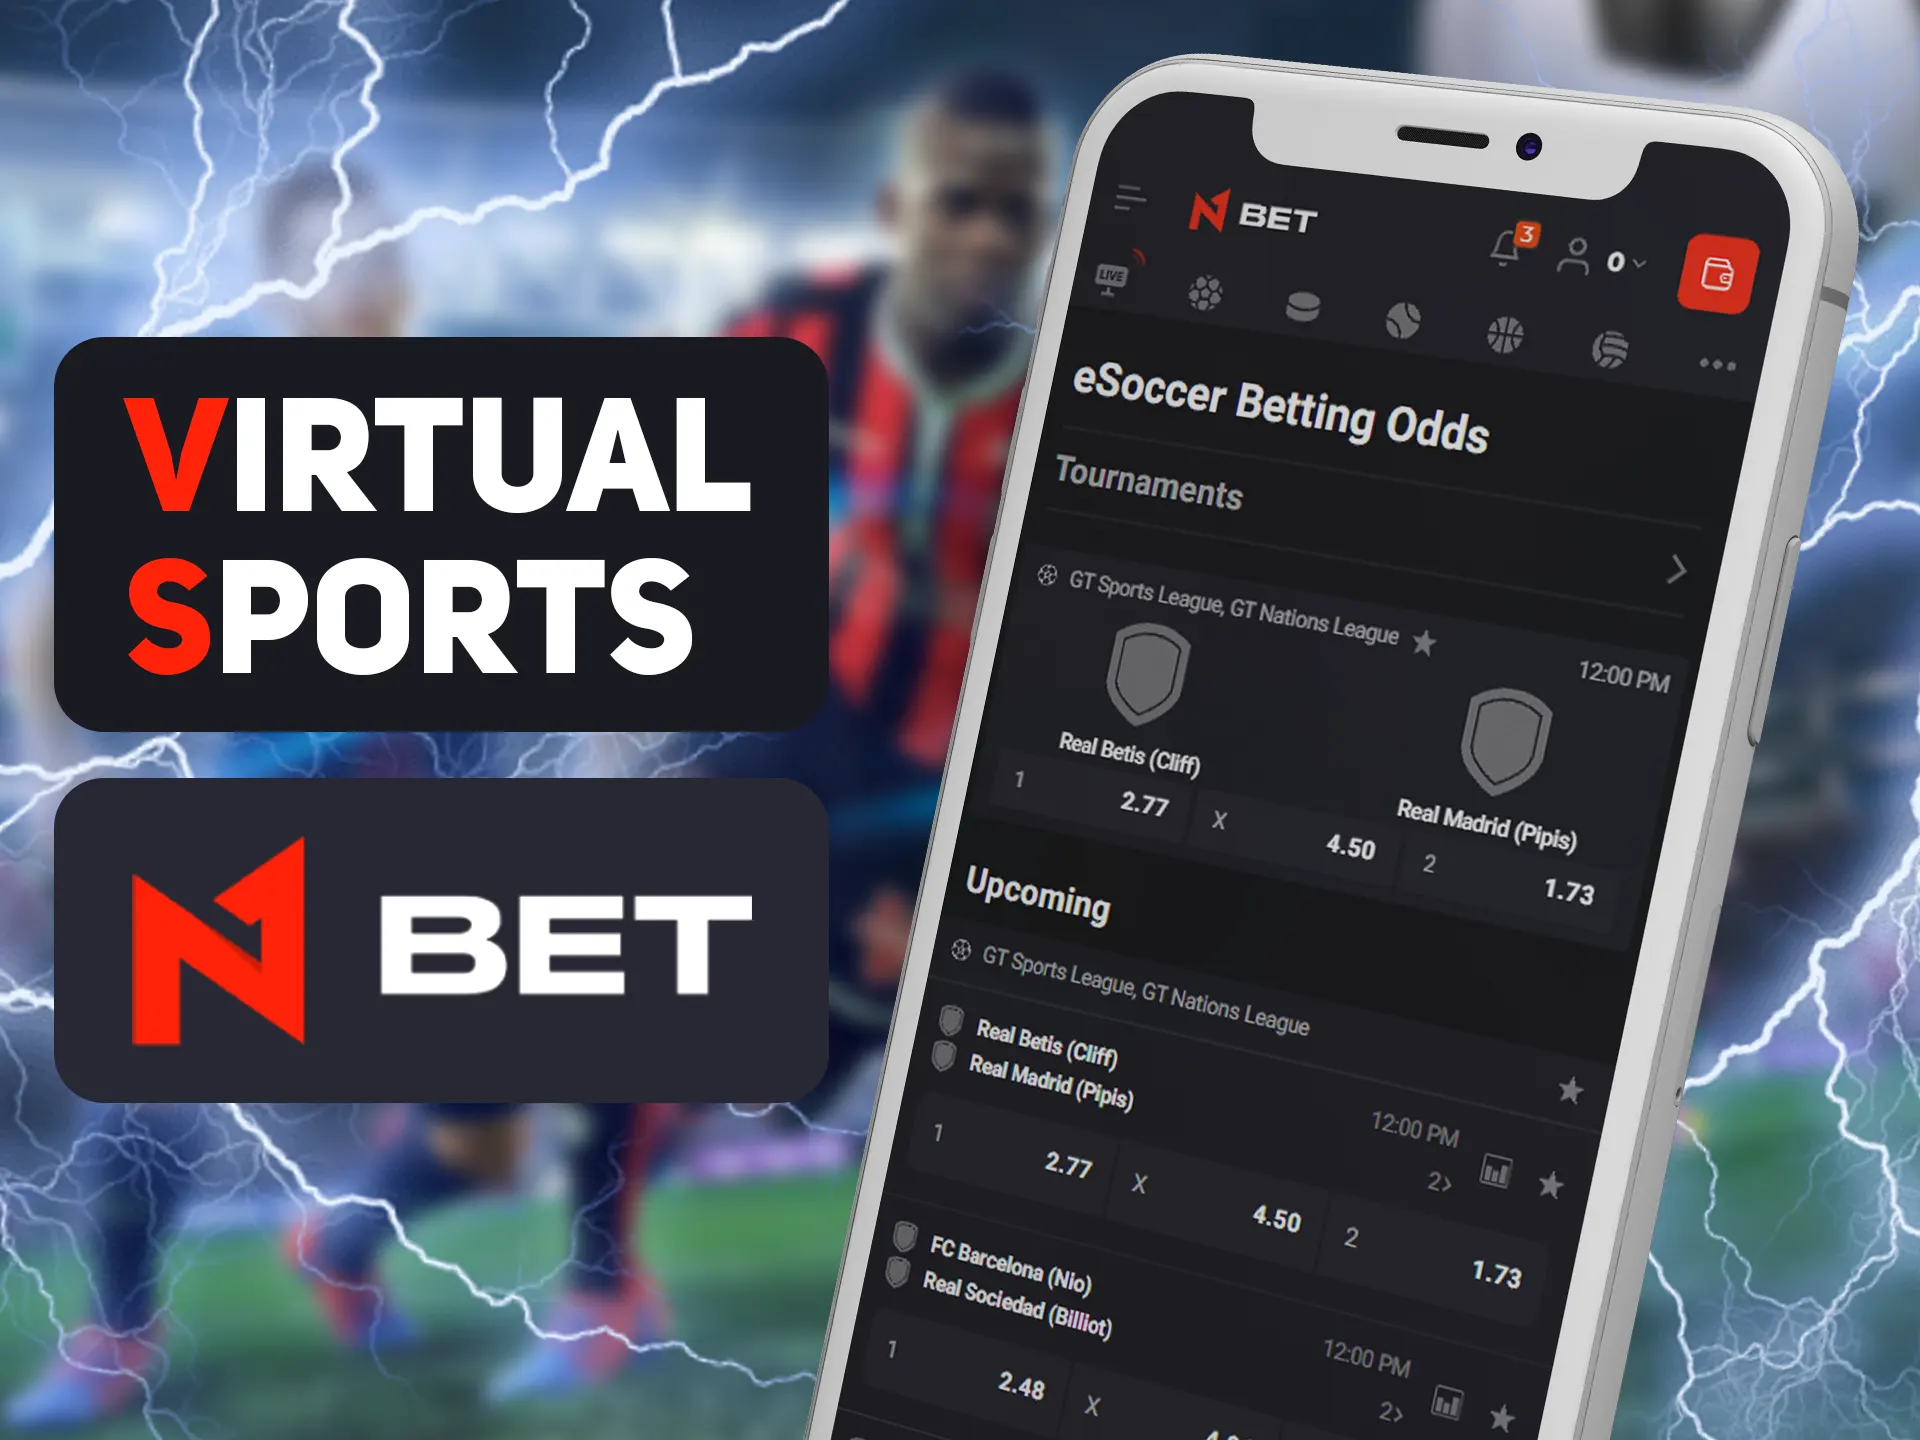 Watch and bet on virtual sports in N1bet app.